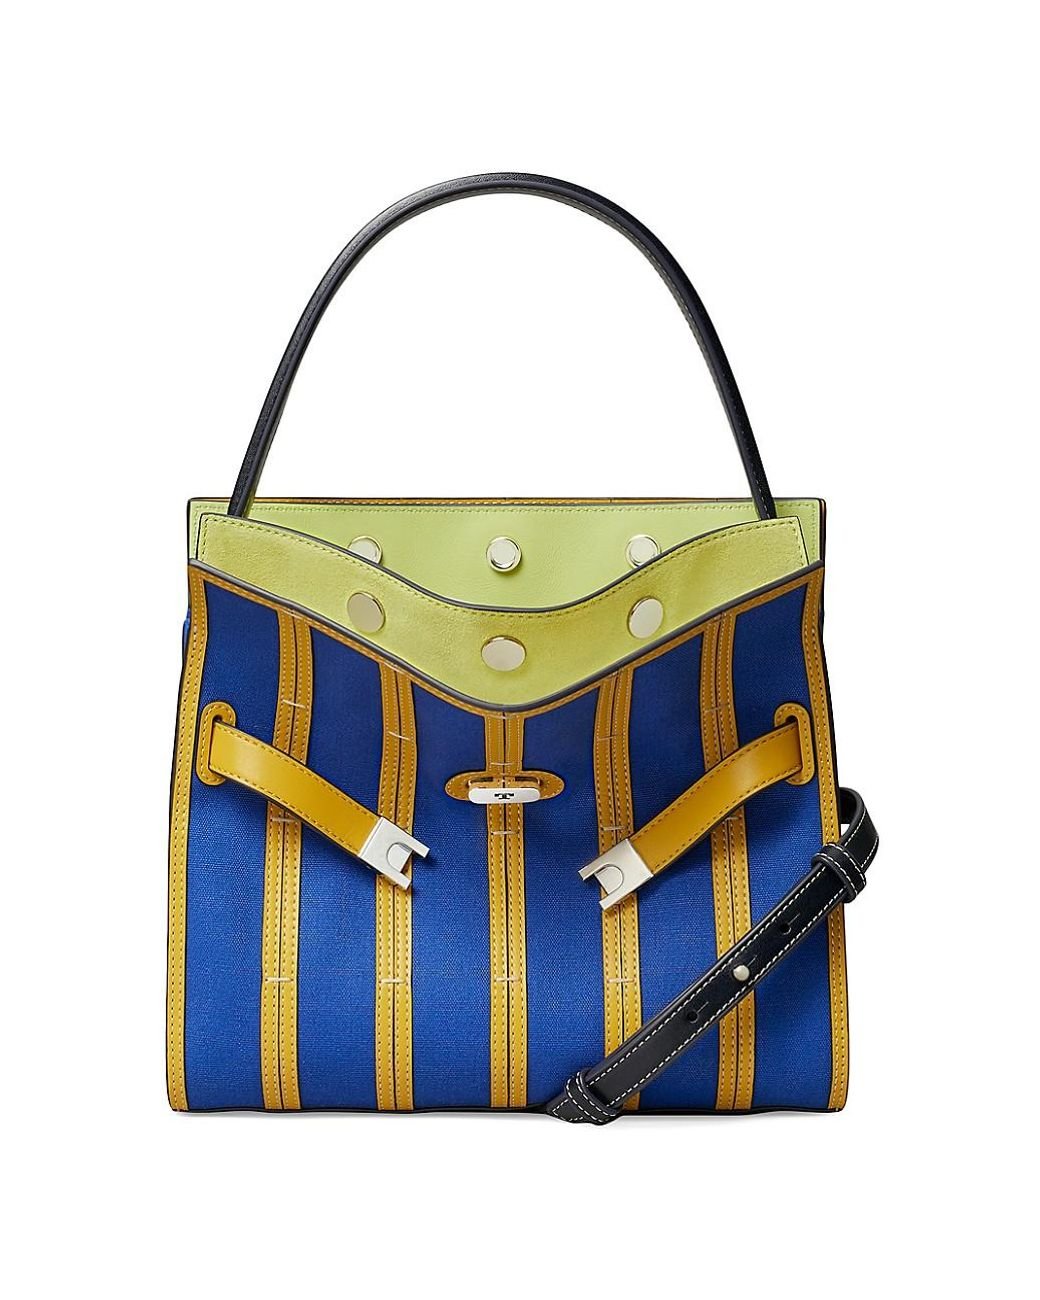 Tory Burch Small Lee Radziwill Canvas & Leather Double Bag in Blue